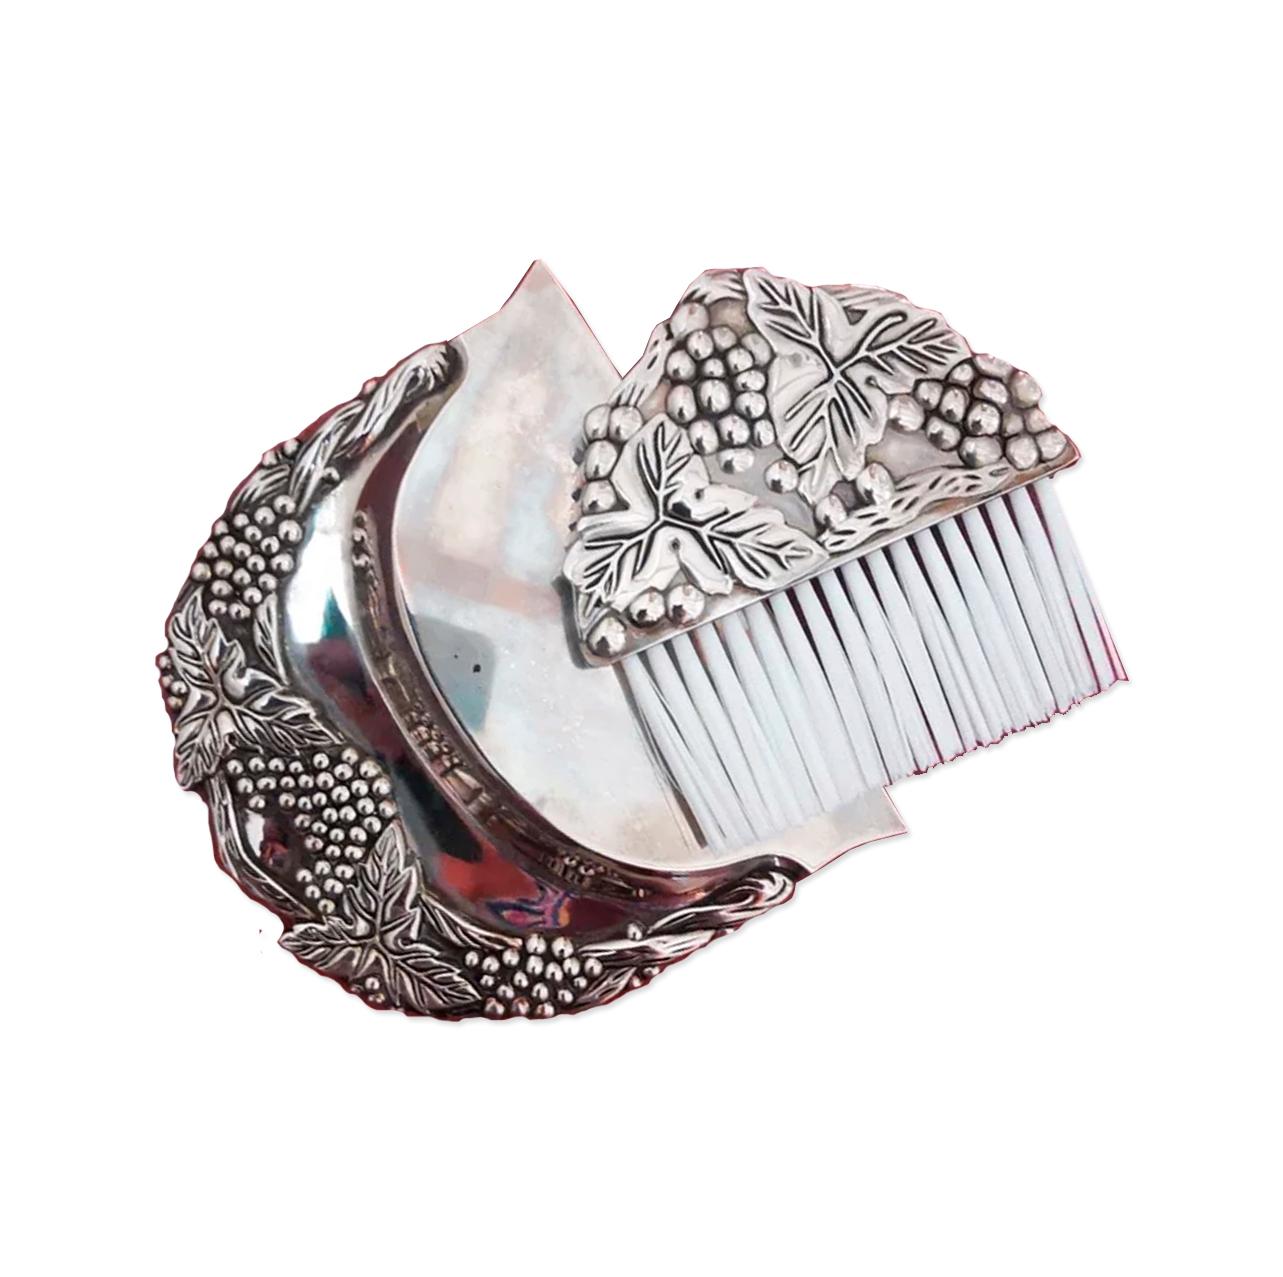 silvery filigree crumb catcher with bunches of grapes and vine leaves

Beautiful crumb catcher for autumn and harvest times

We have other accessories such as tray napkin holders with the same decorative motifs

silvery crumb catcher.